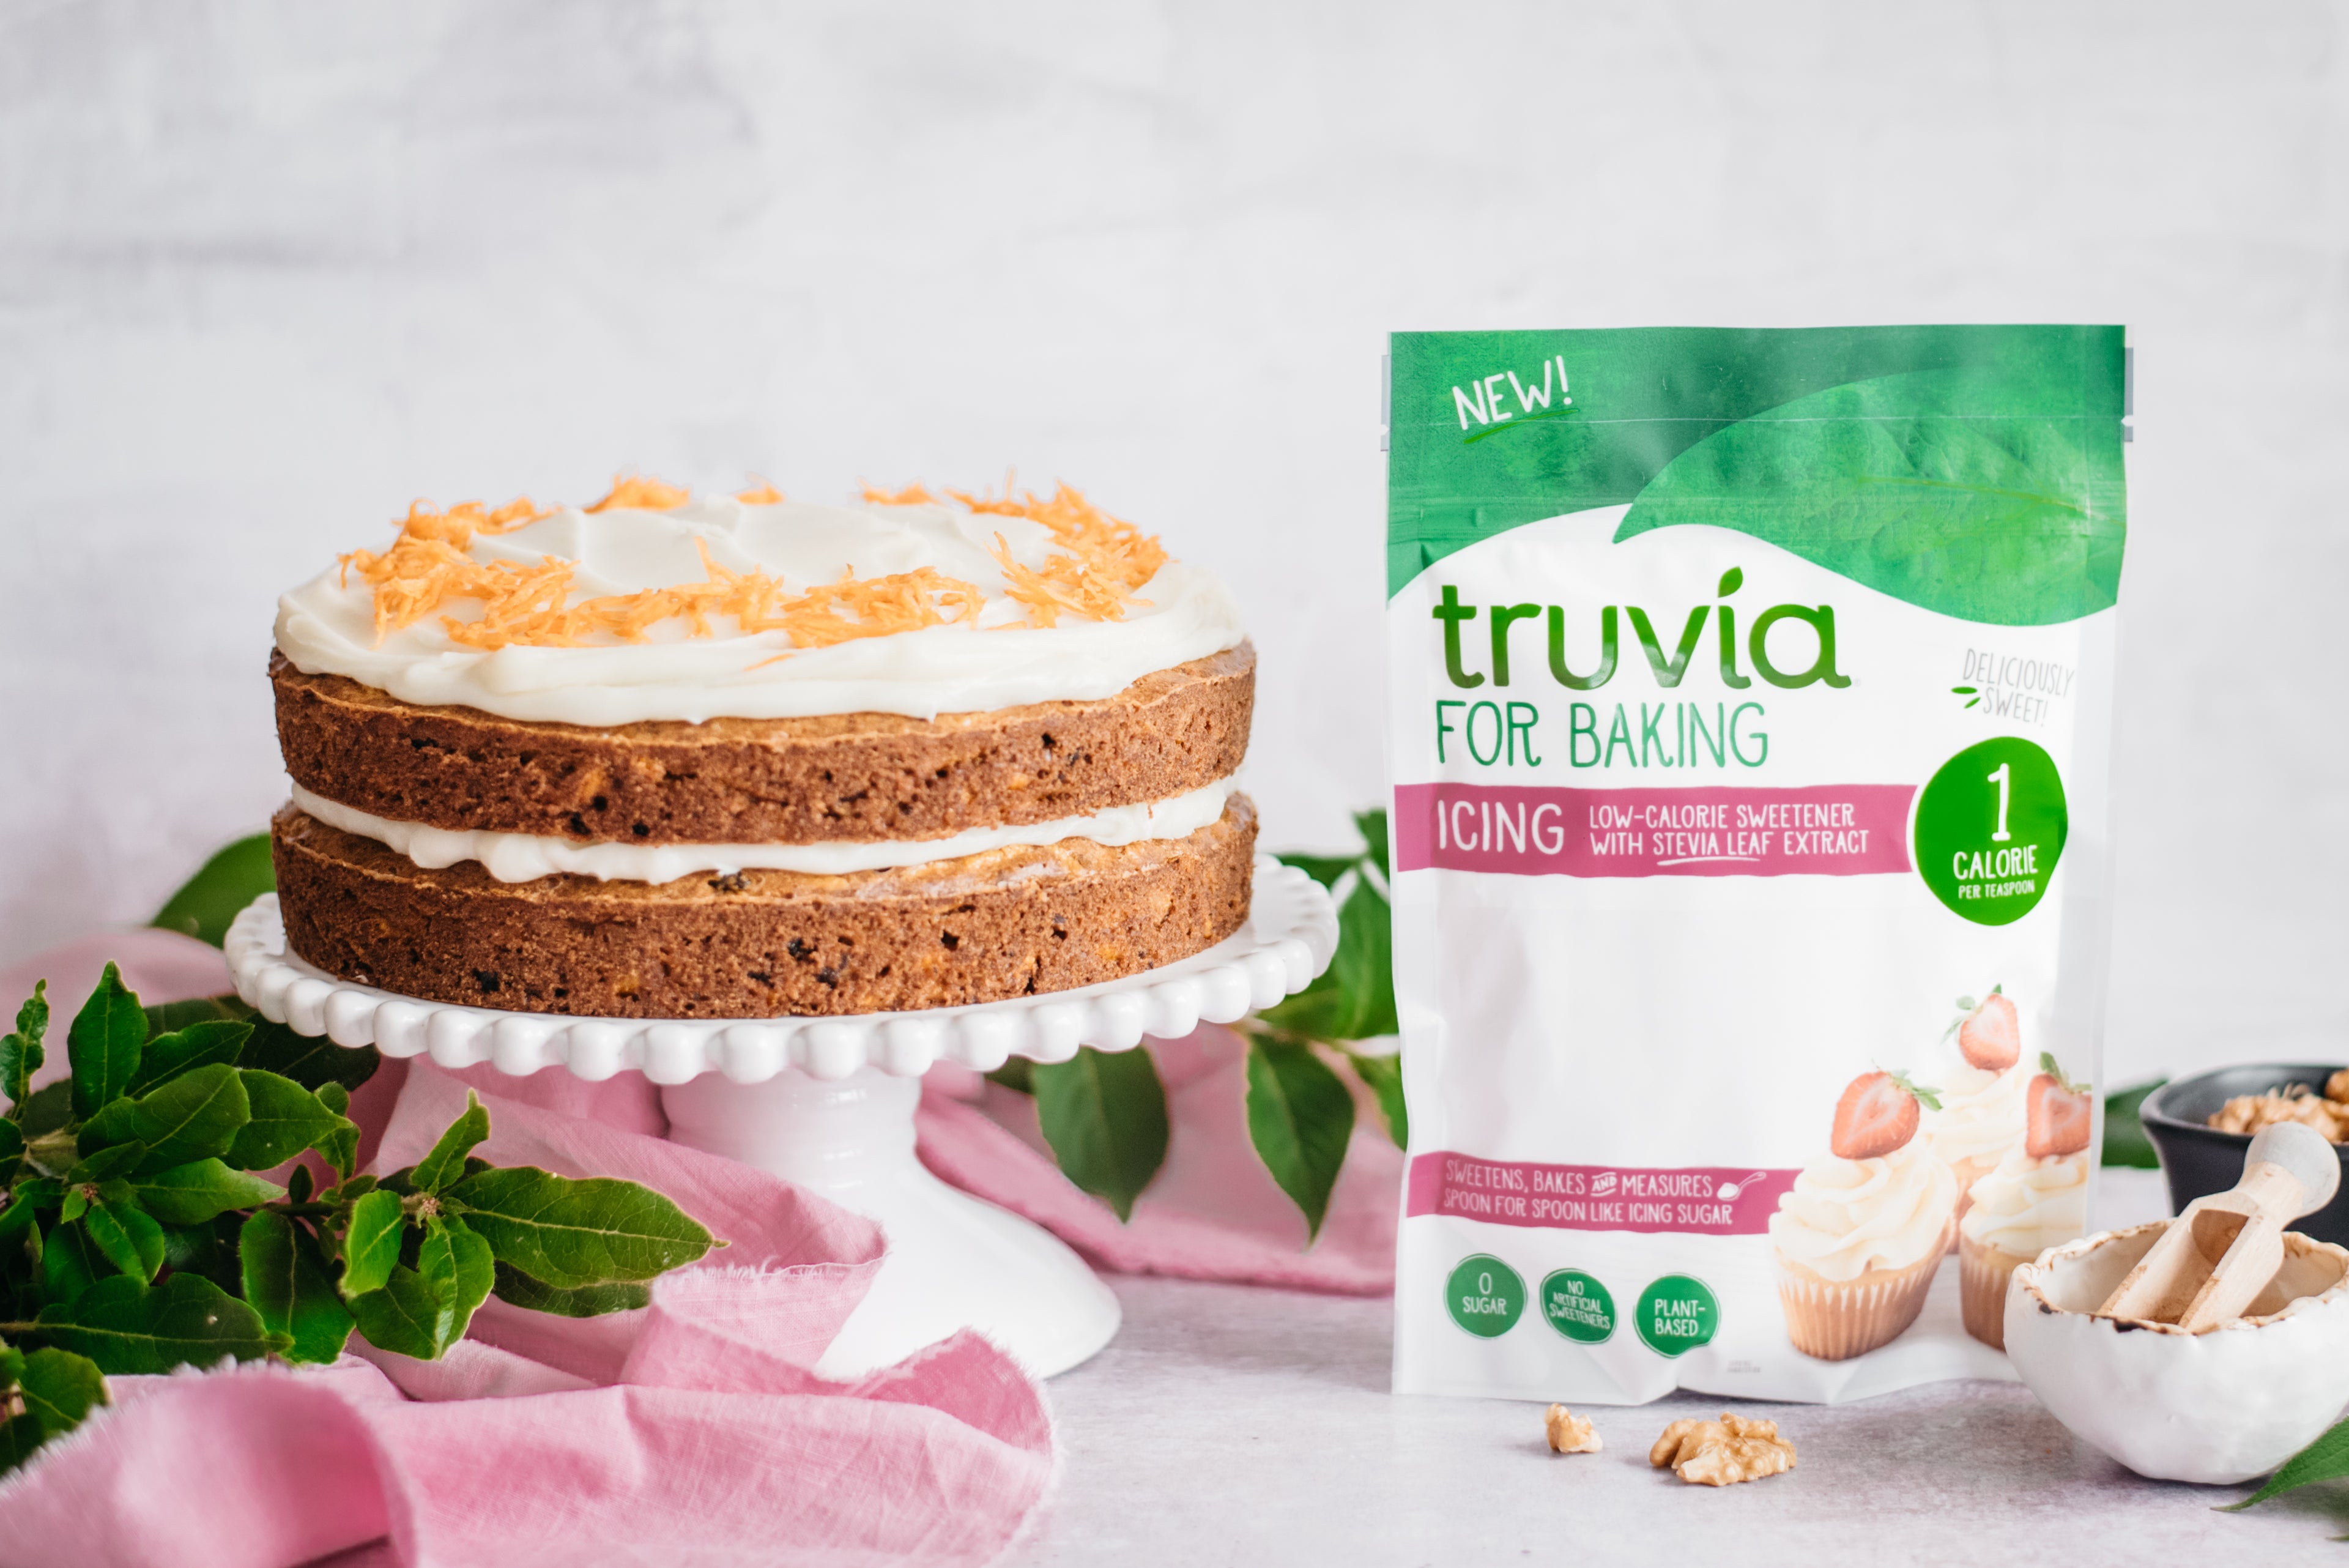 Side on view of a low sugar carrot cake next to a pack of truvia for baking icing